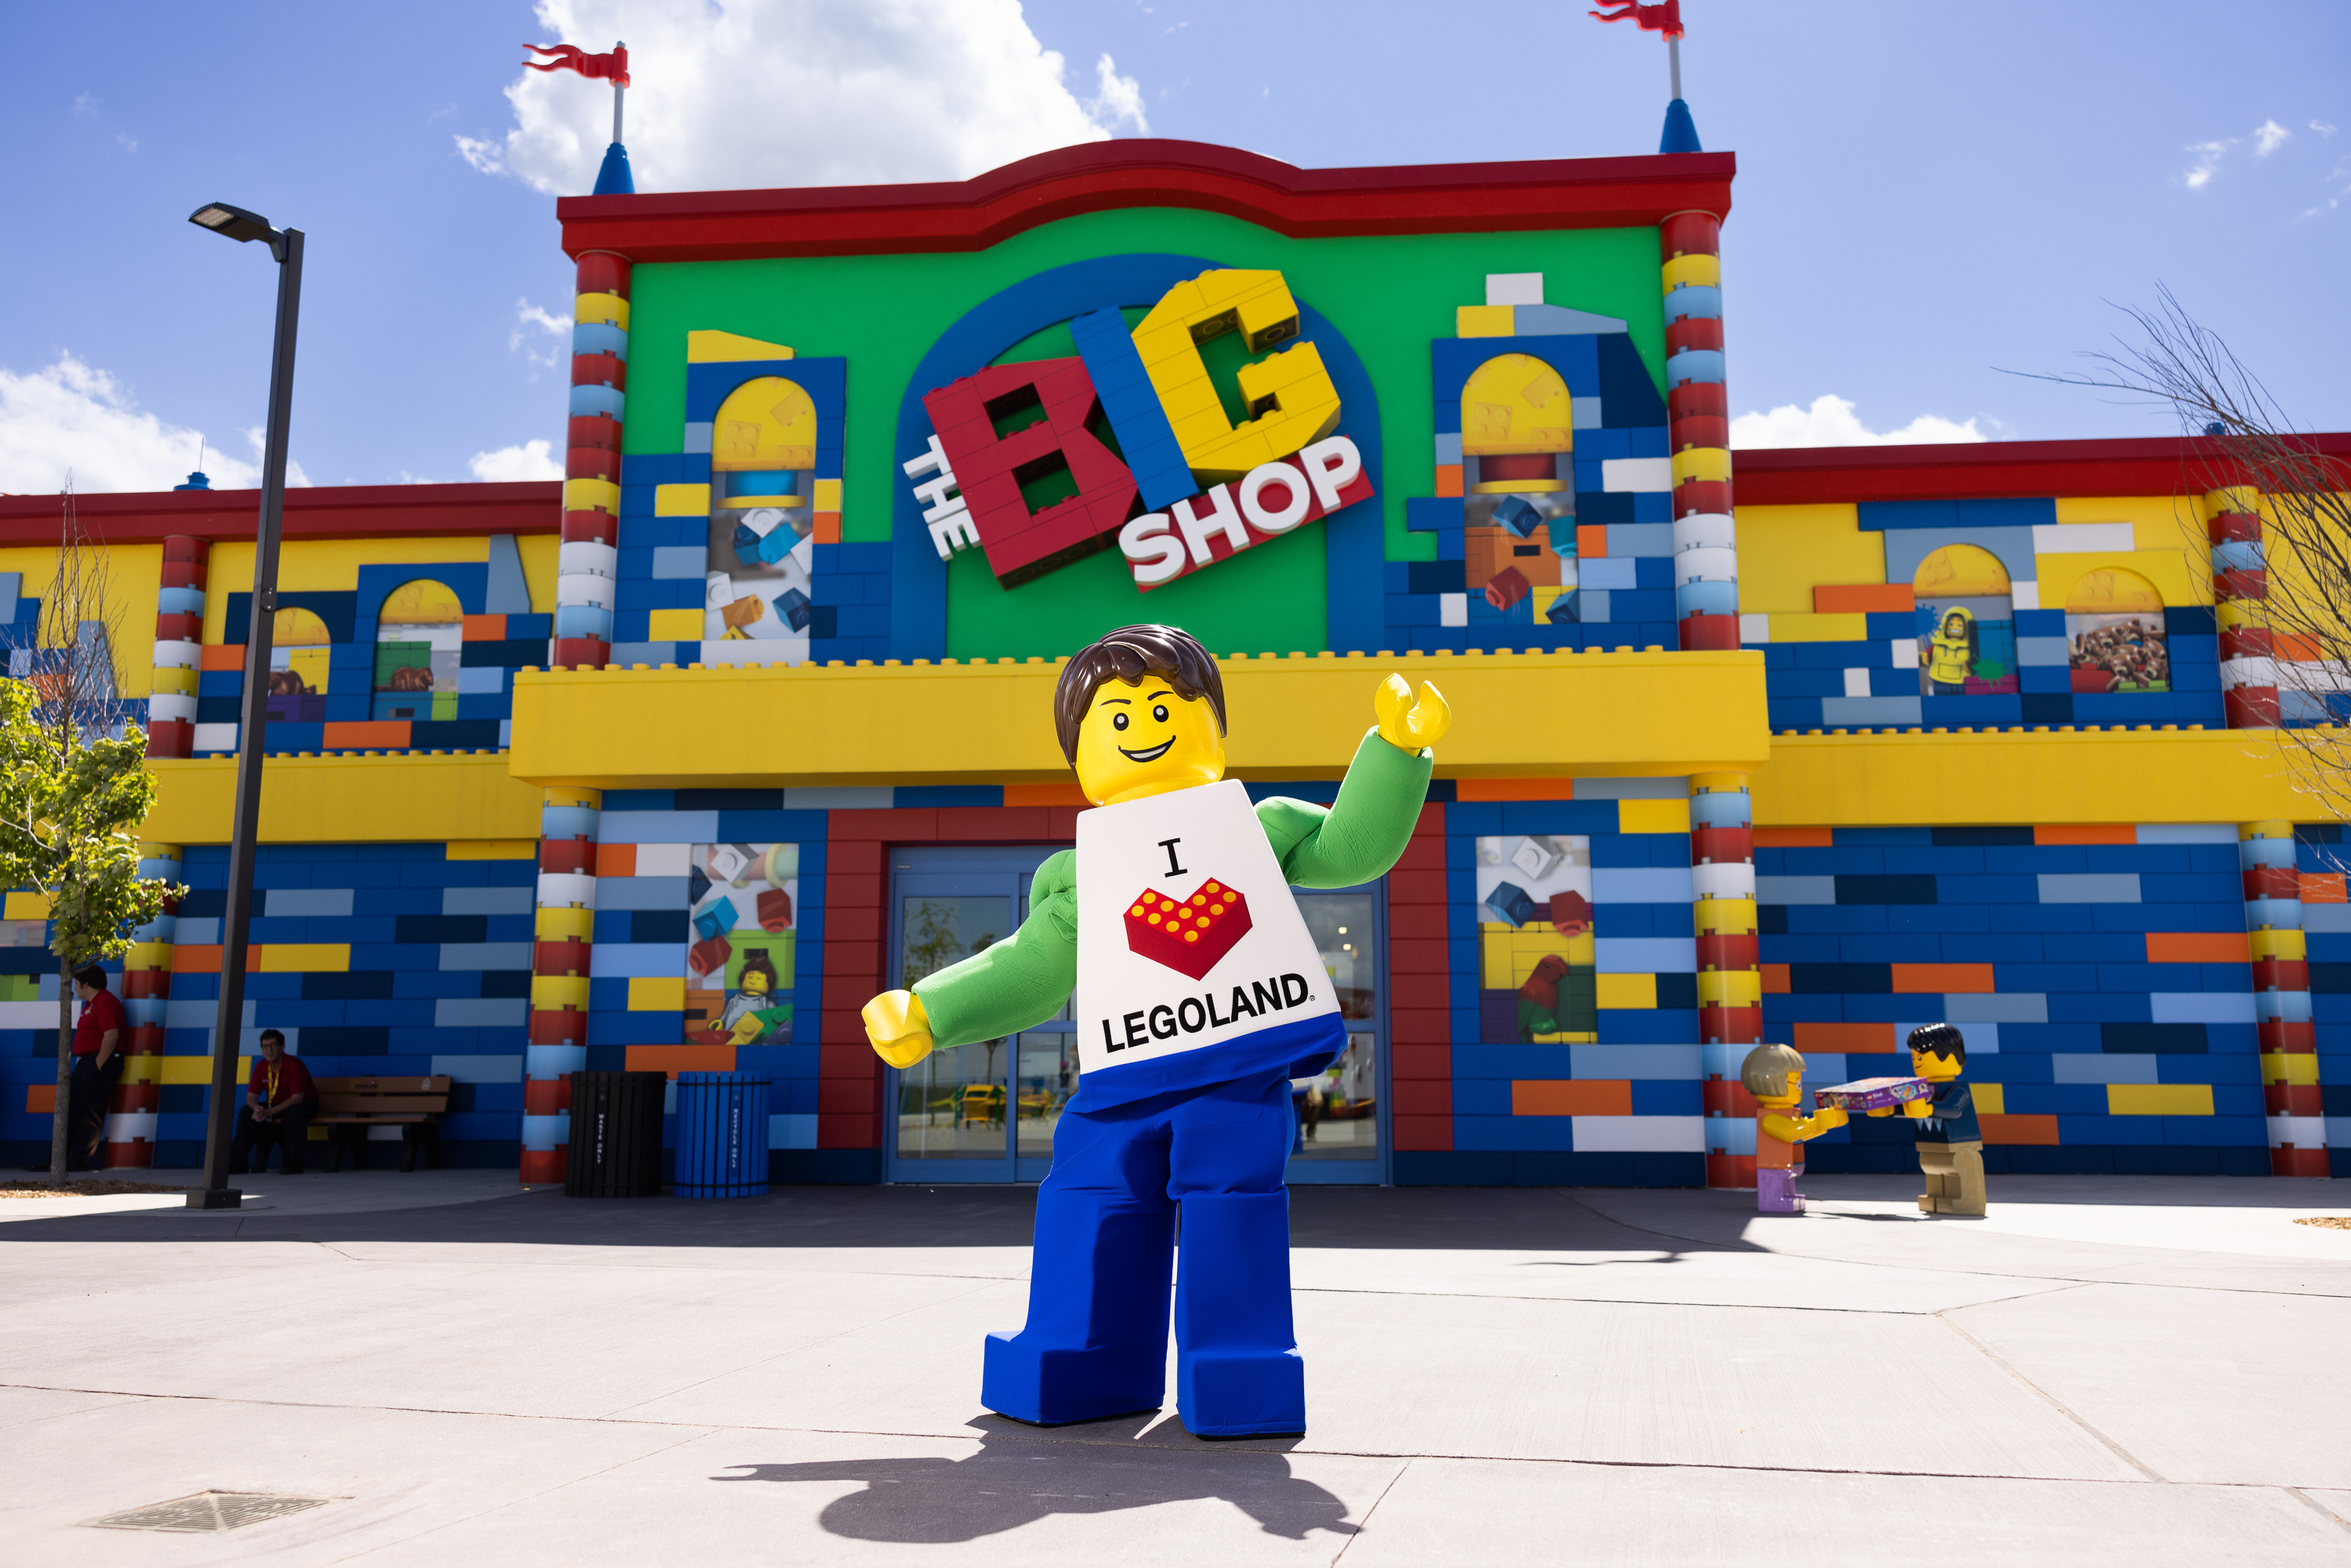 LEGOLAND Mike is ready to meet visitors at the Brick Street Meet & Greet